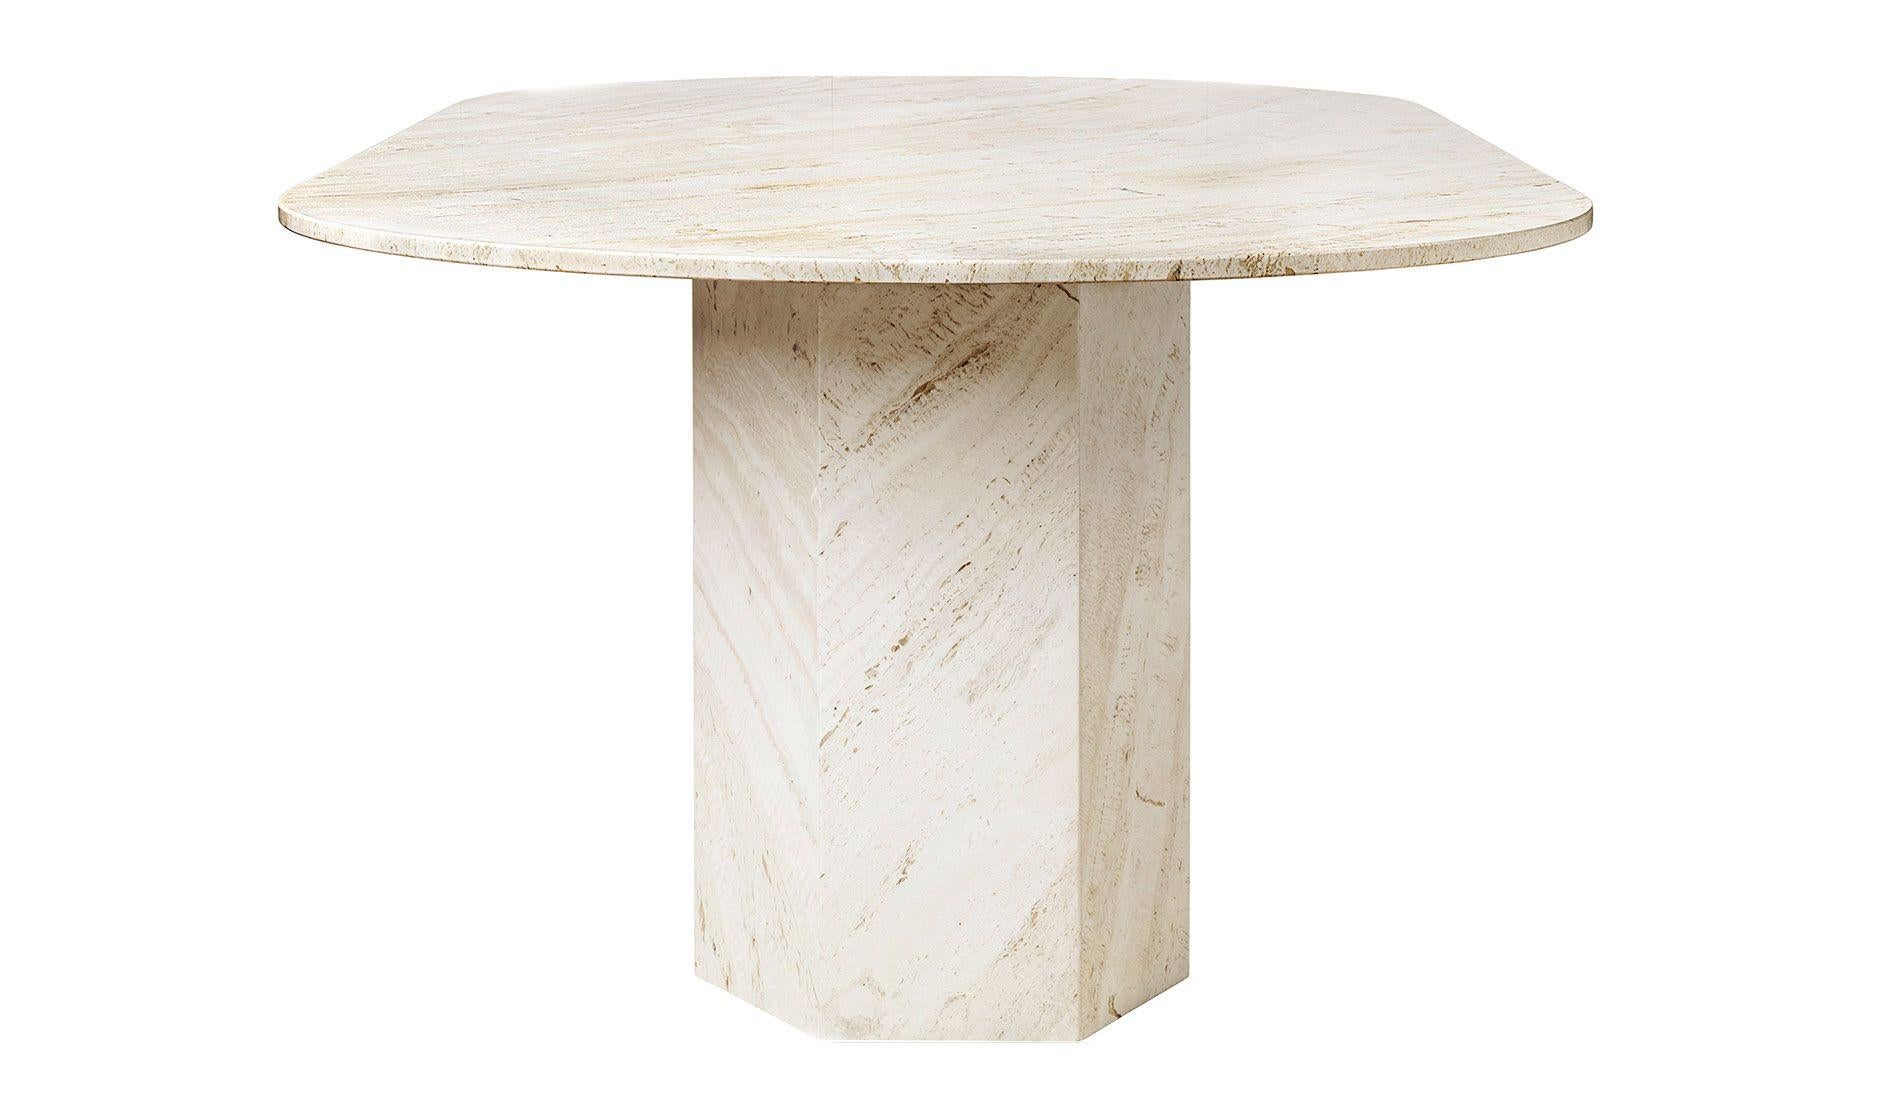 Introducing our Travertine Hexagon Dining Table. The sculptural piece of Dining table is inspired by Greek columns and Roman architecture. The collection brings personality to private spaces and adds an intriguing sense of weight and tactility to